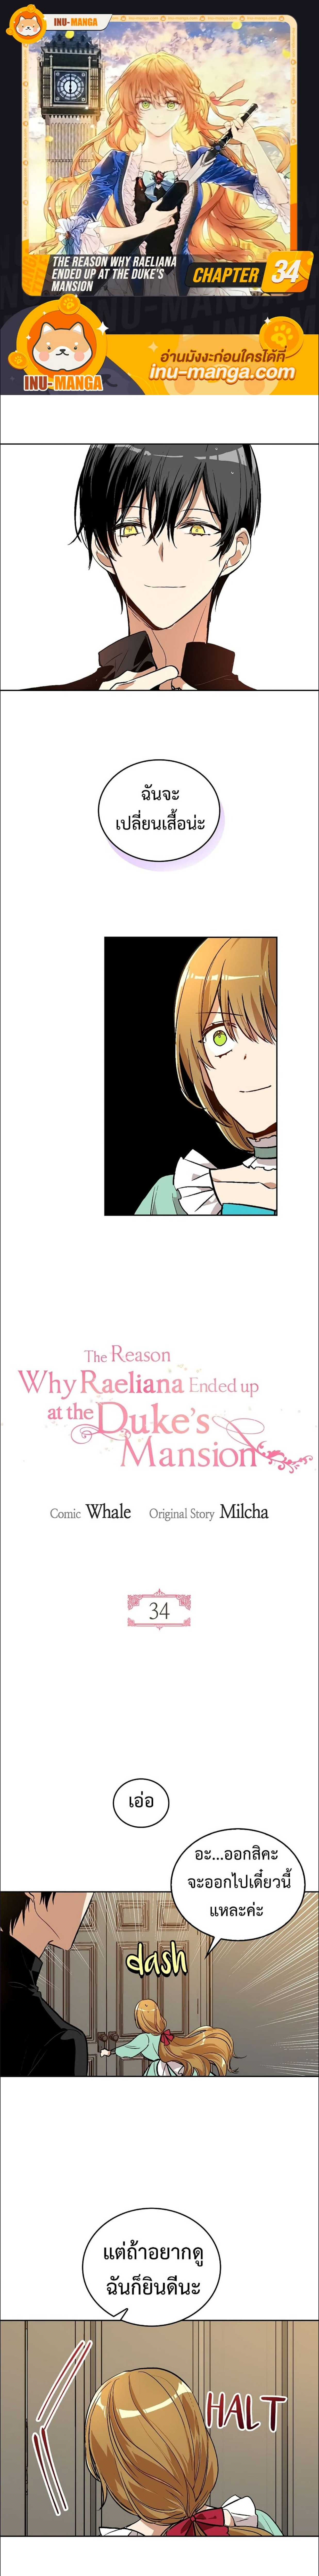 The Reason Why Raeliana Ended up at the Duke’s Mansion ตอนที่ 34 (1)